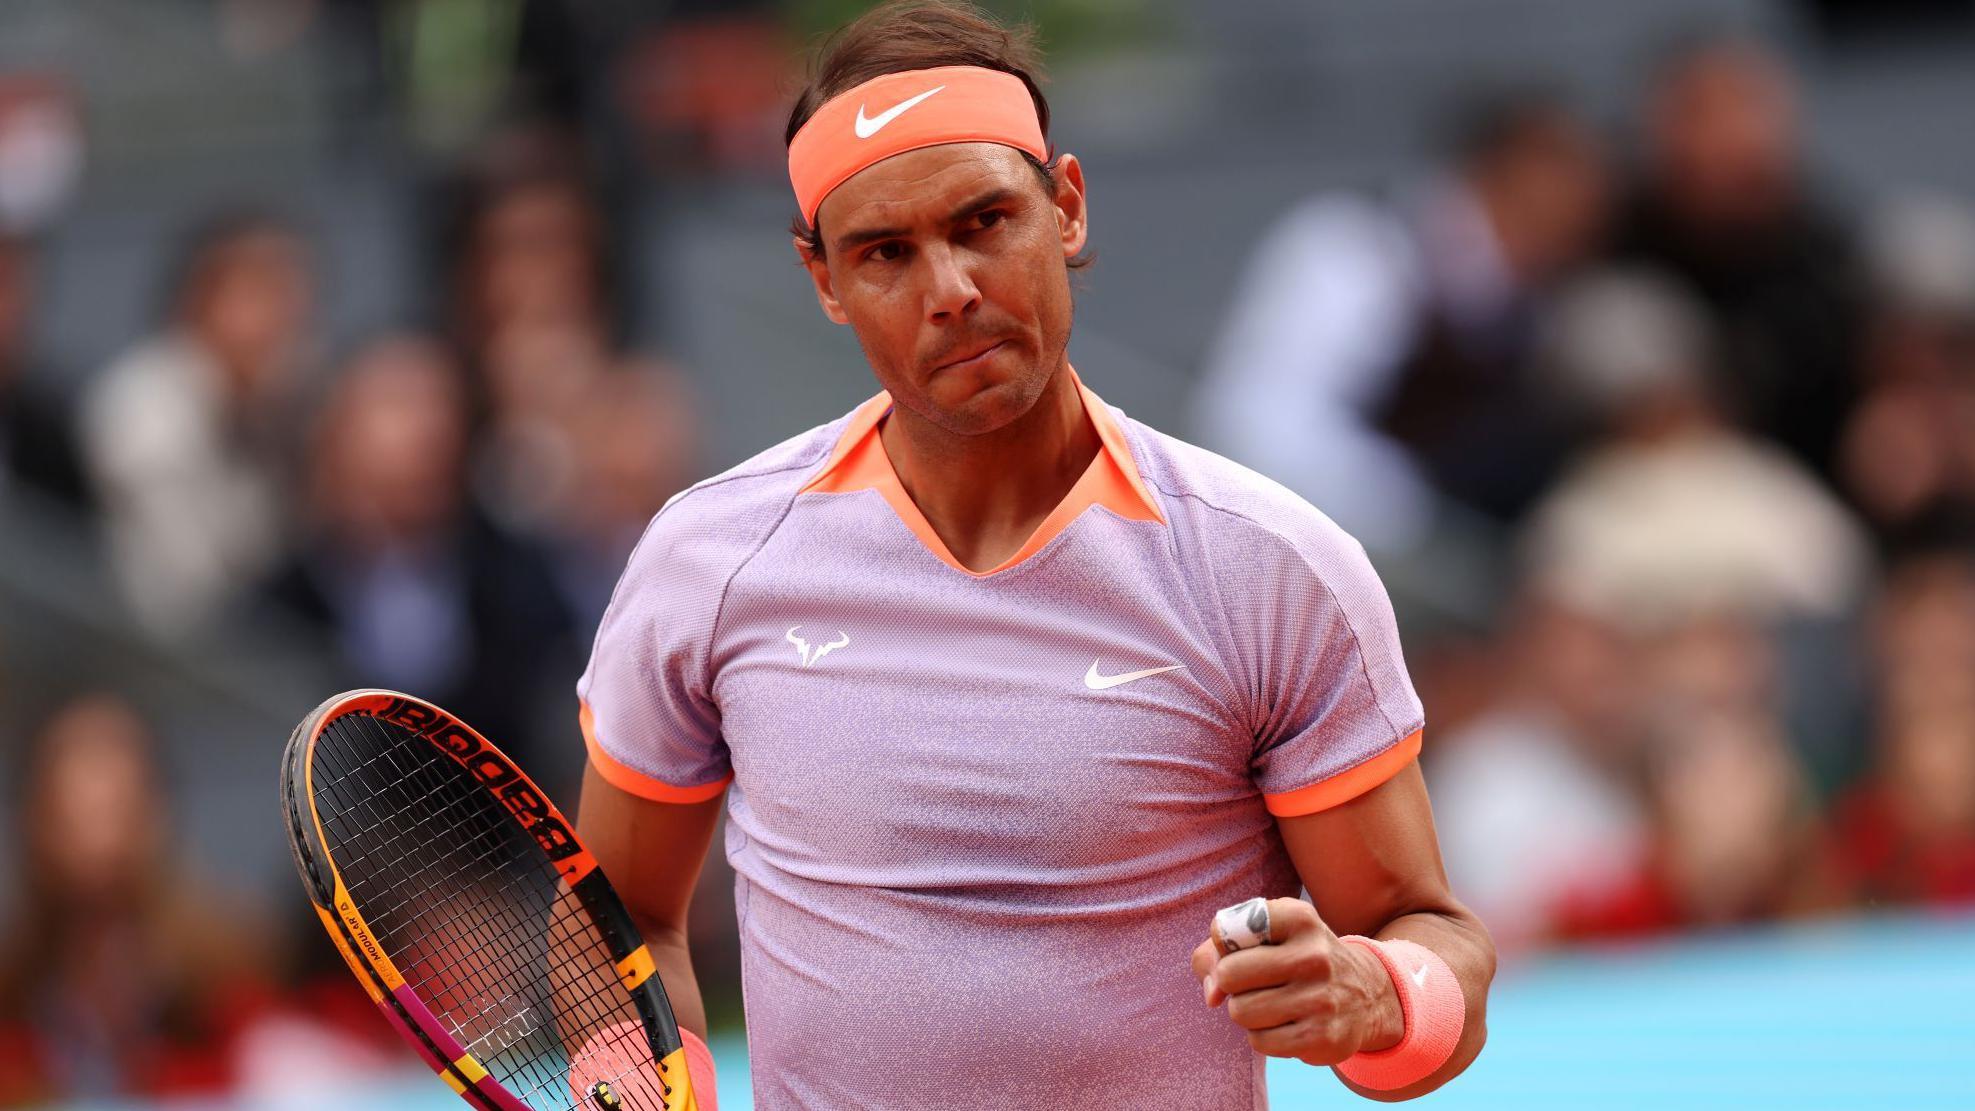 nadal begins madrid open with straight-set win